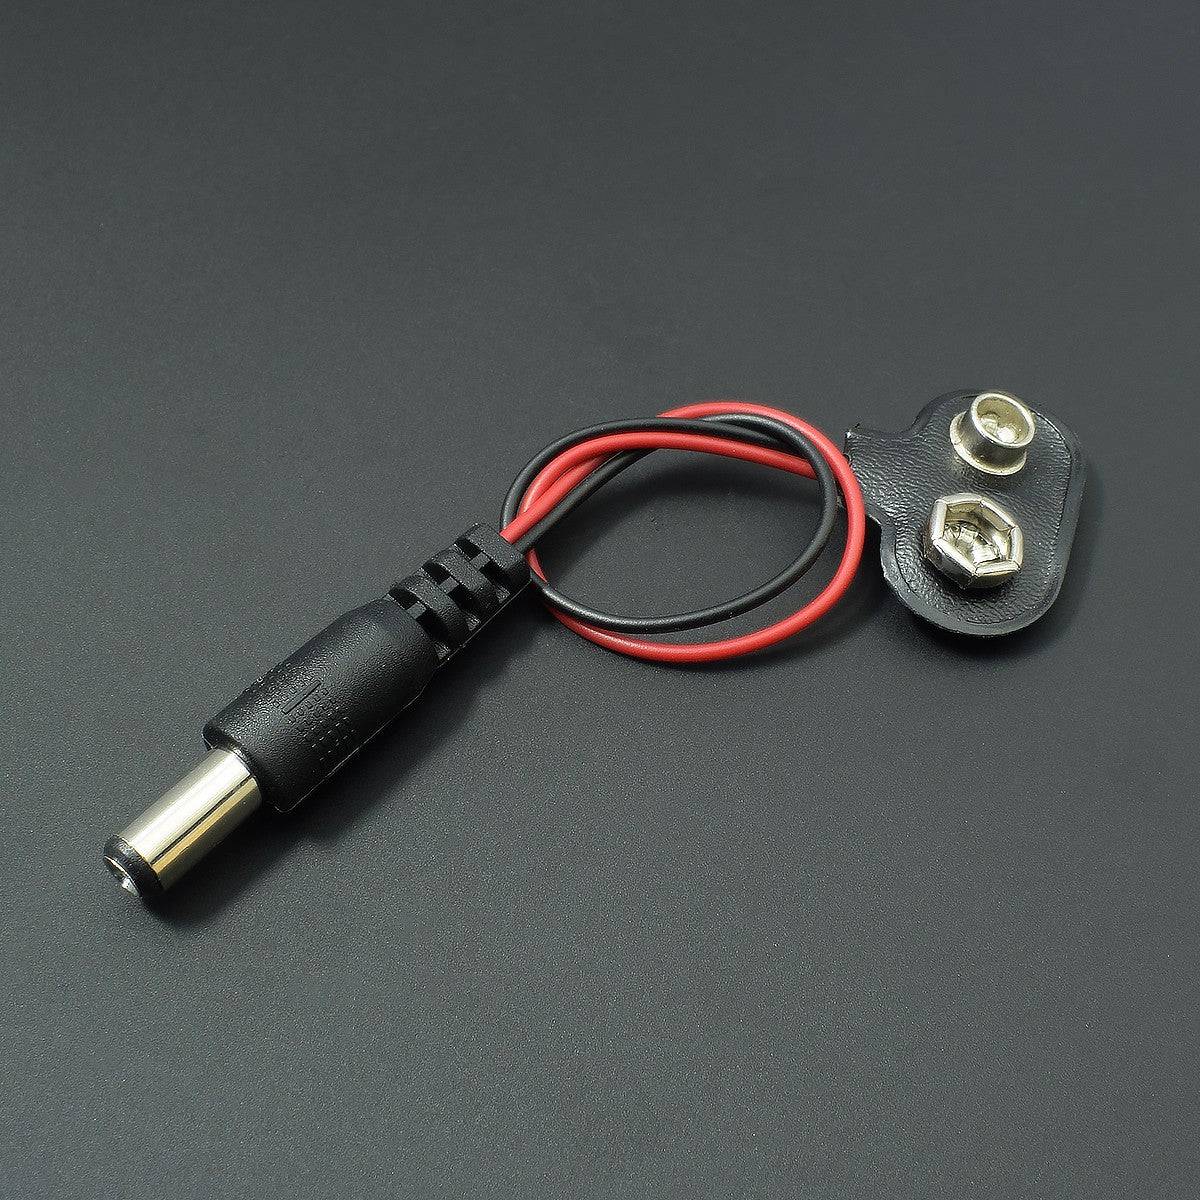 DC 9V Battery Snapper Connector With DC Jack Button Power Cable For Arduino - RS061 - REES52